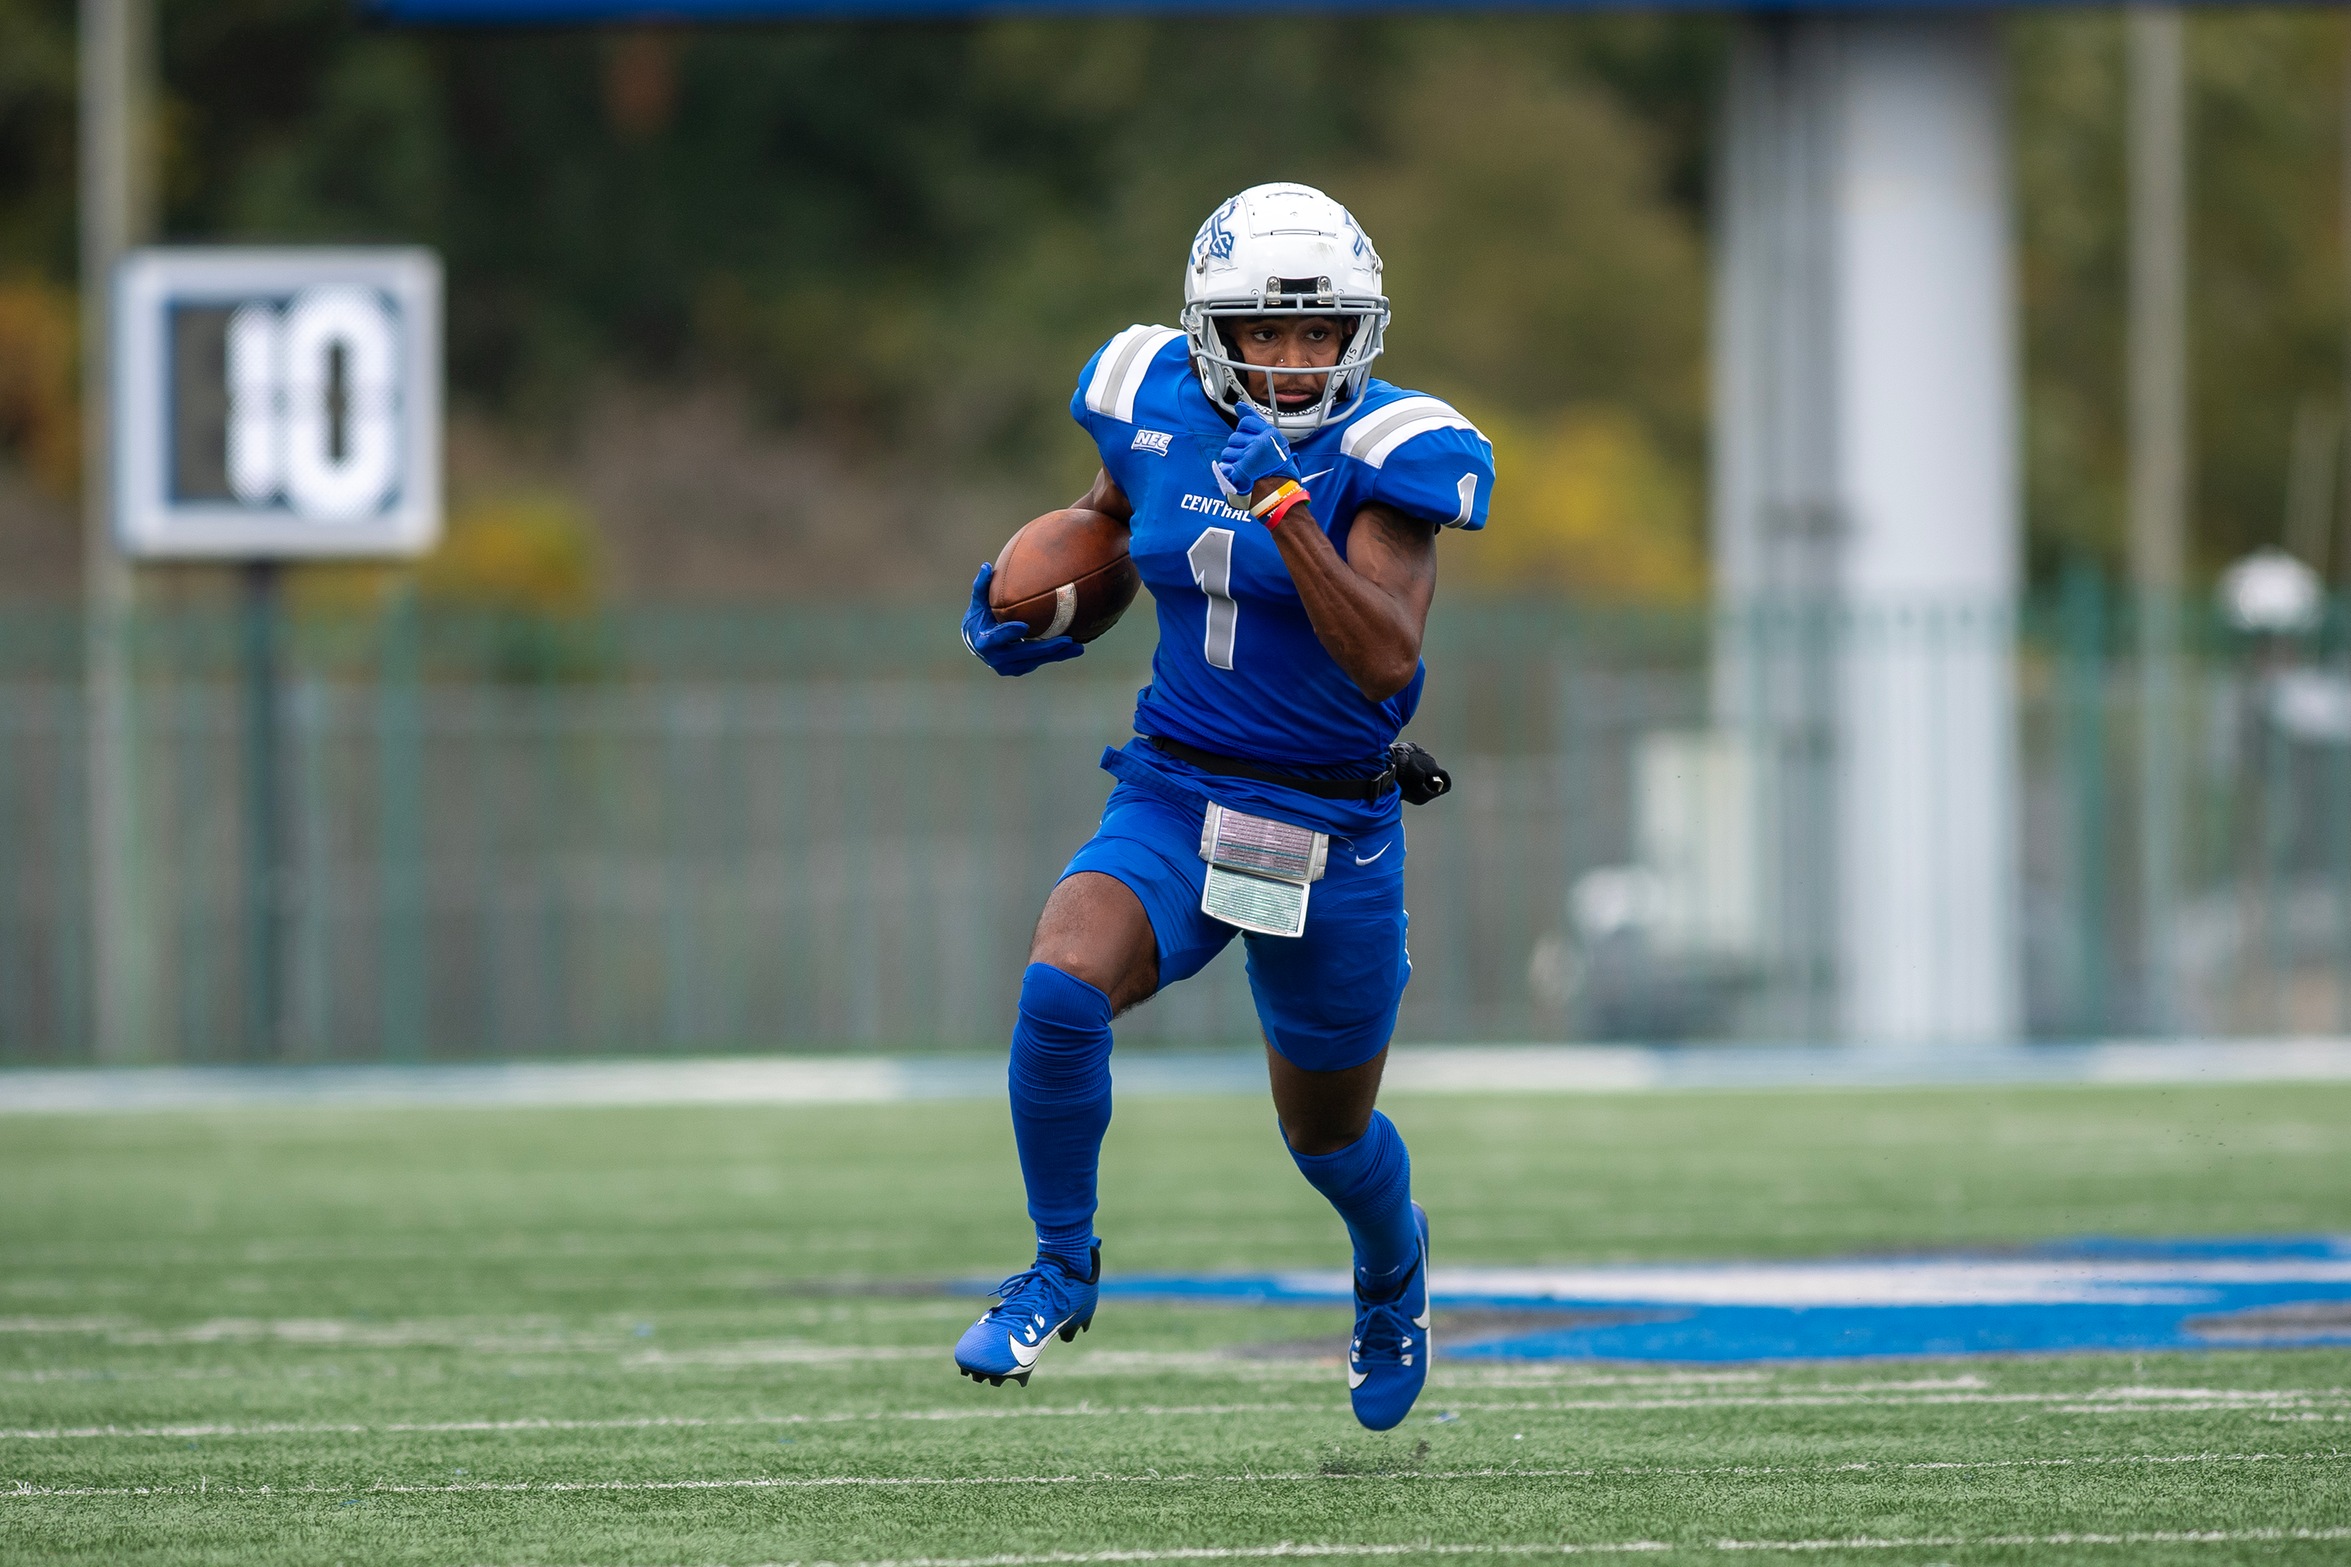 Isiah Williams caught a pair of touchdown passes in the Blue Devils win at Wagner on Saturday. (Photo: Steve McLaughlin)